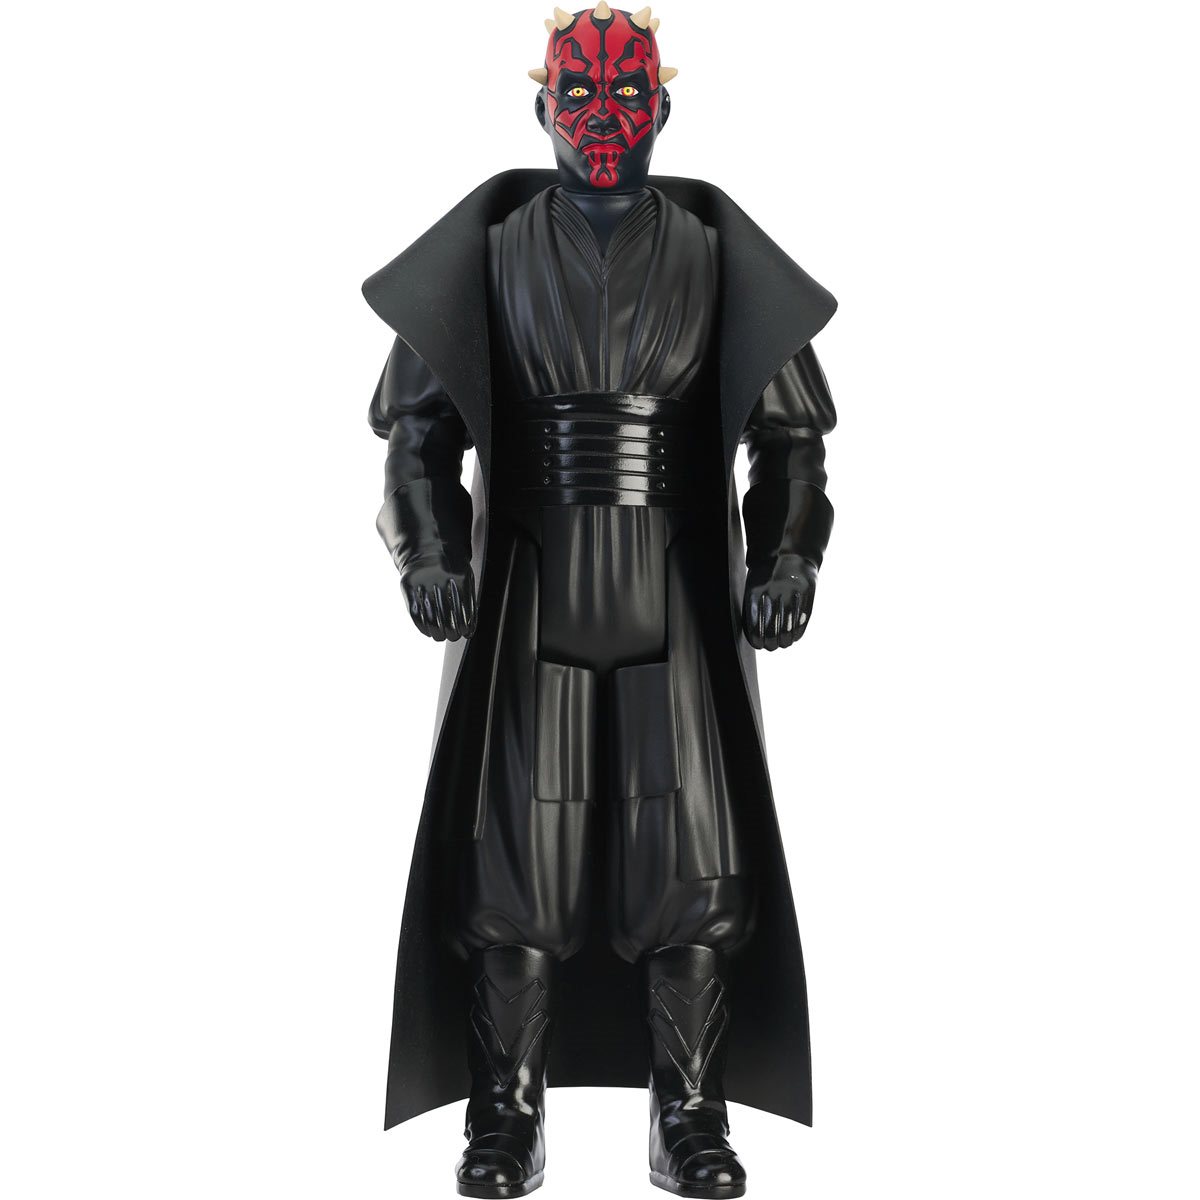 Details about   Applause Star Wars The Phantom Menace Darth Maul 12" Action Figure Figurine 